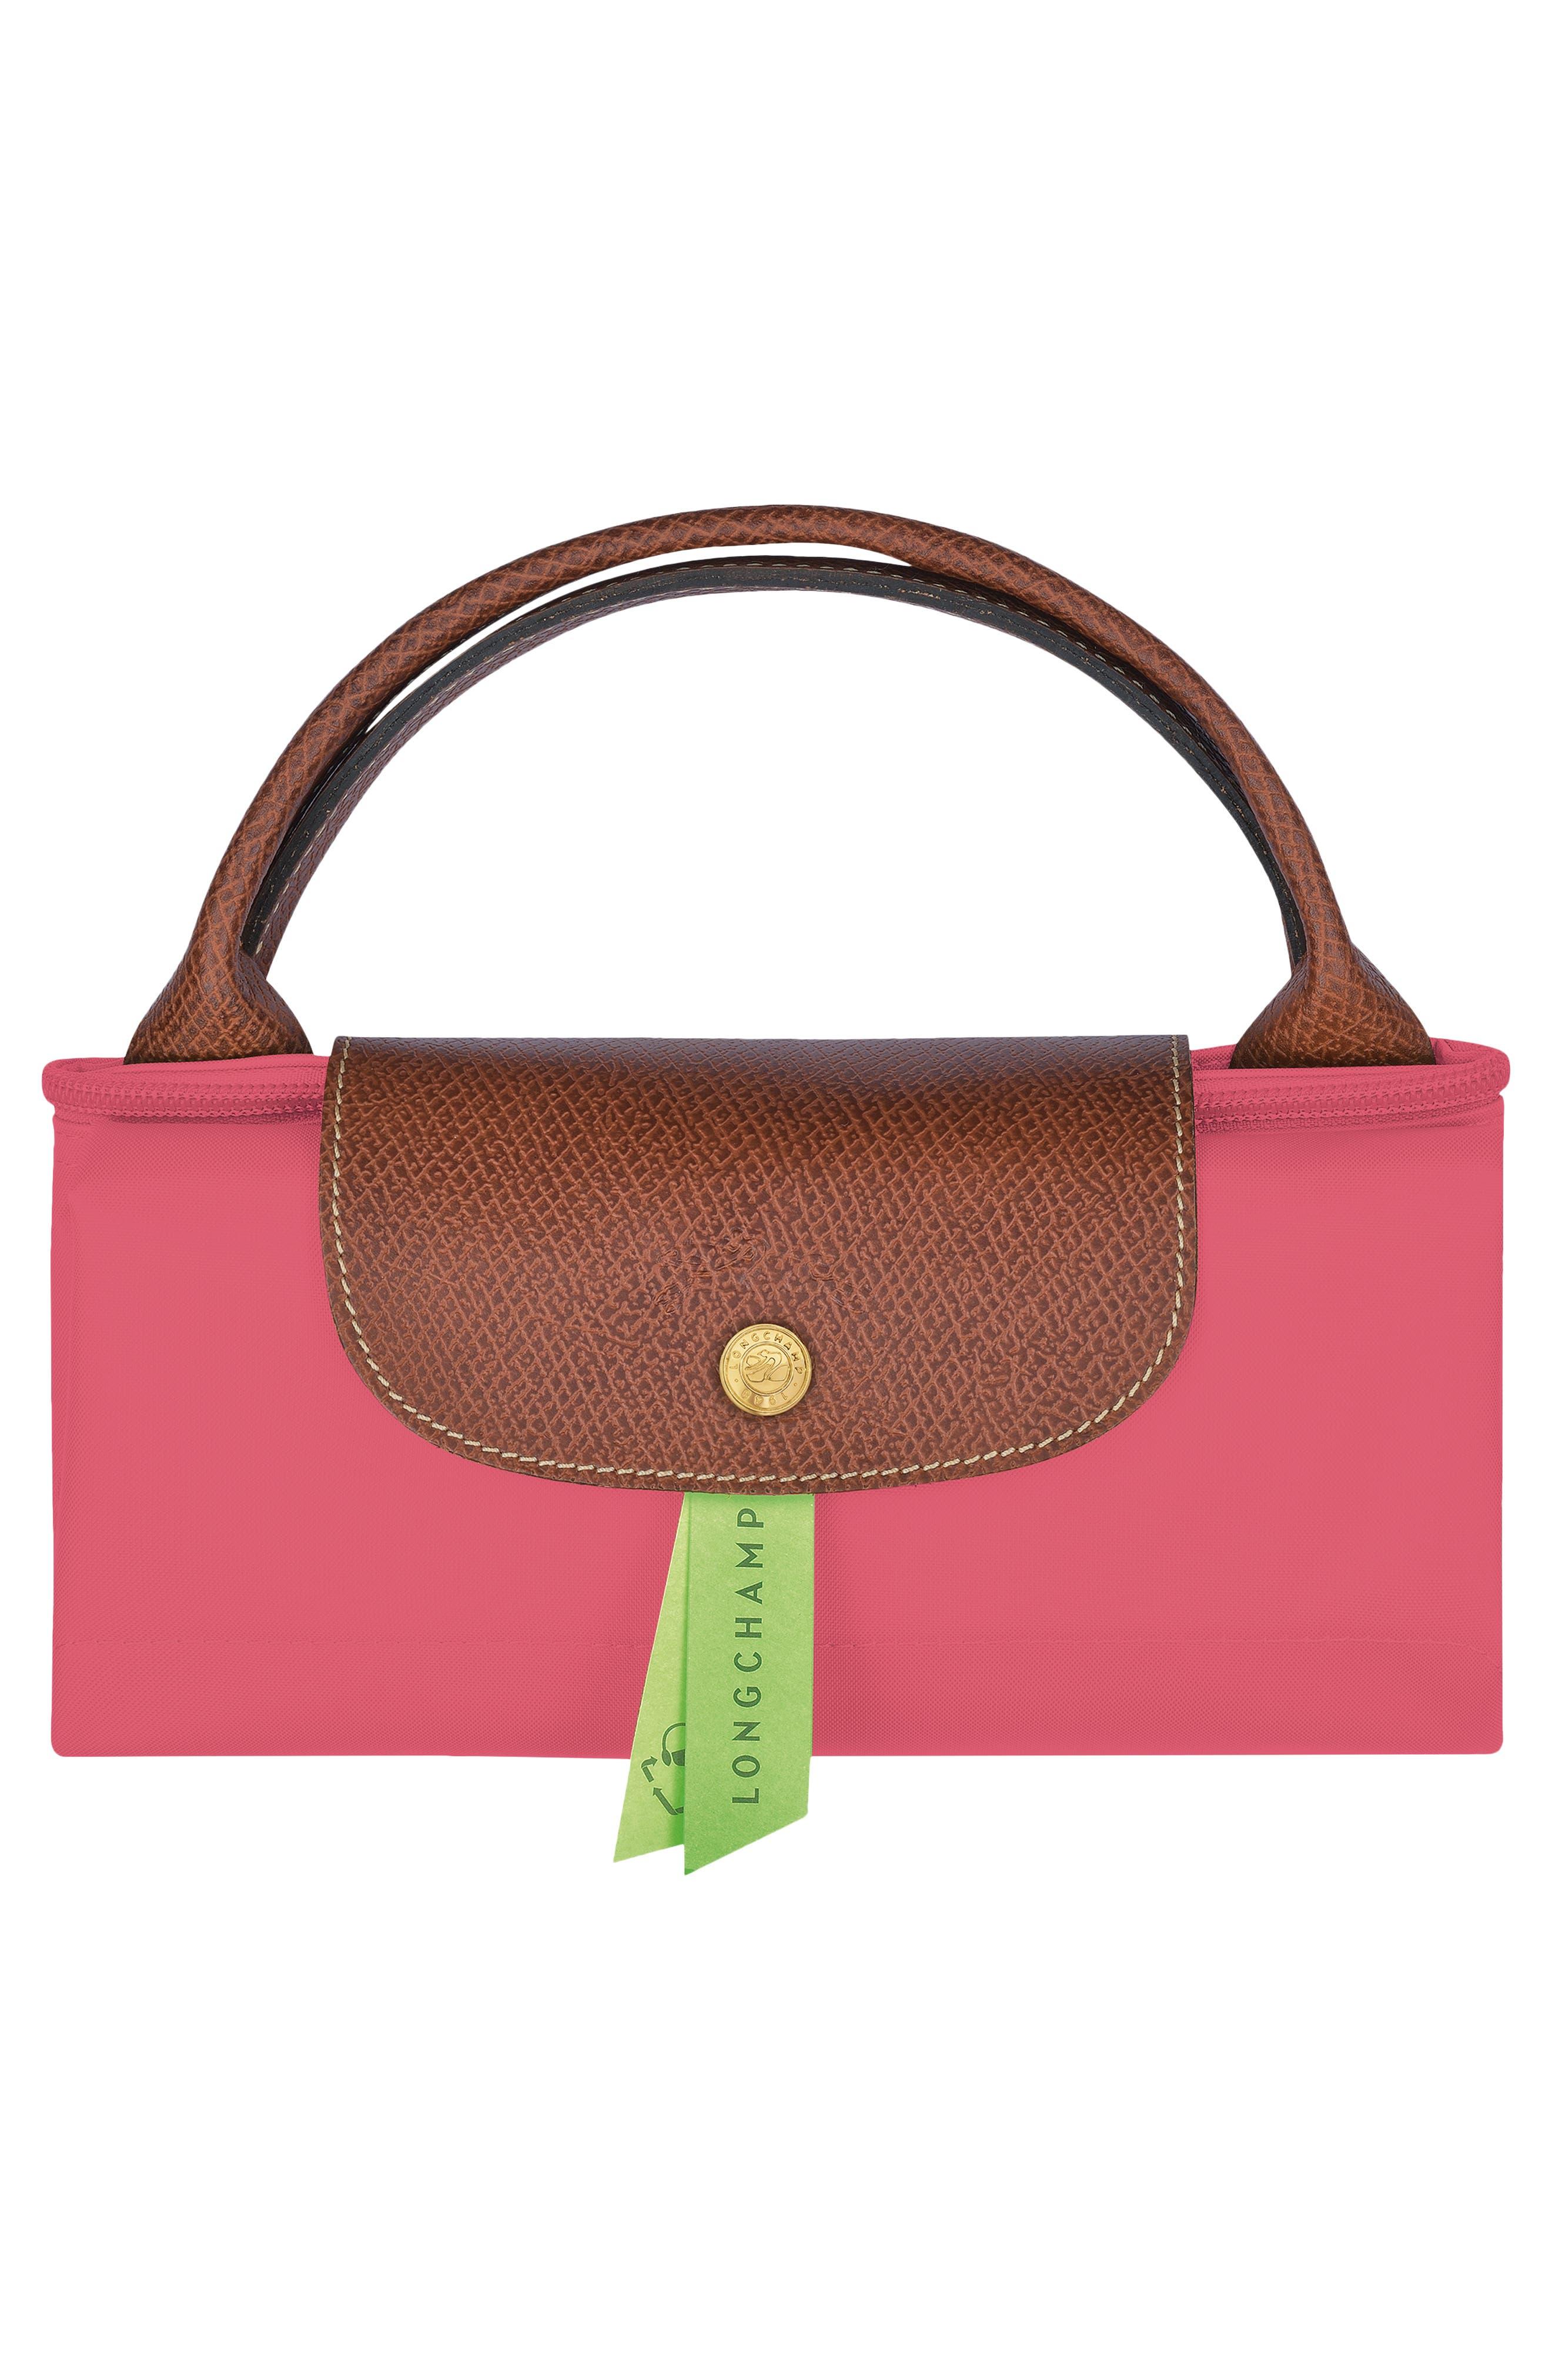 Longchamp Le Pliage Green S Travel bag Pink - Recycled canvas